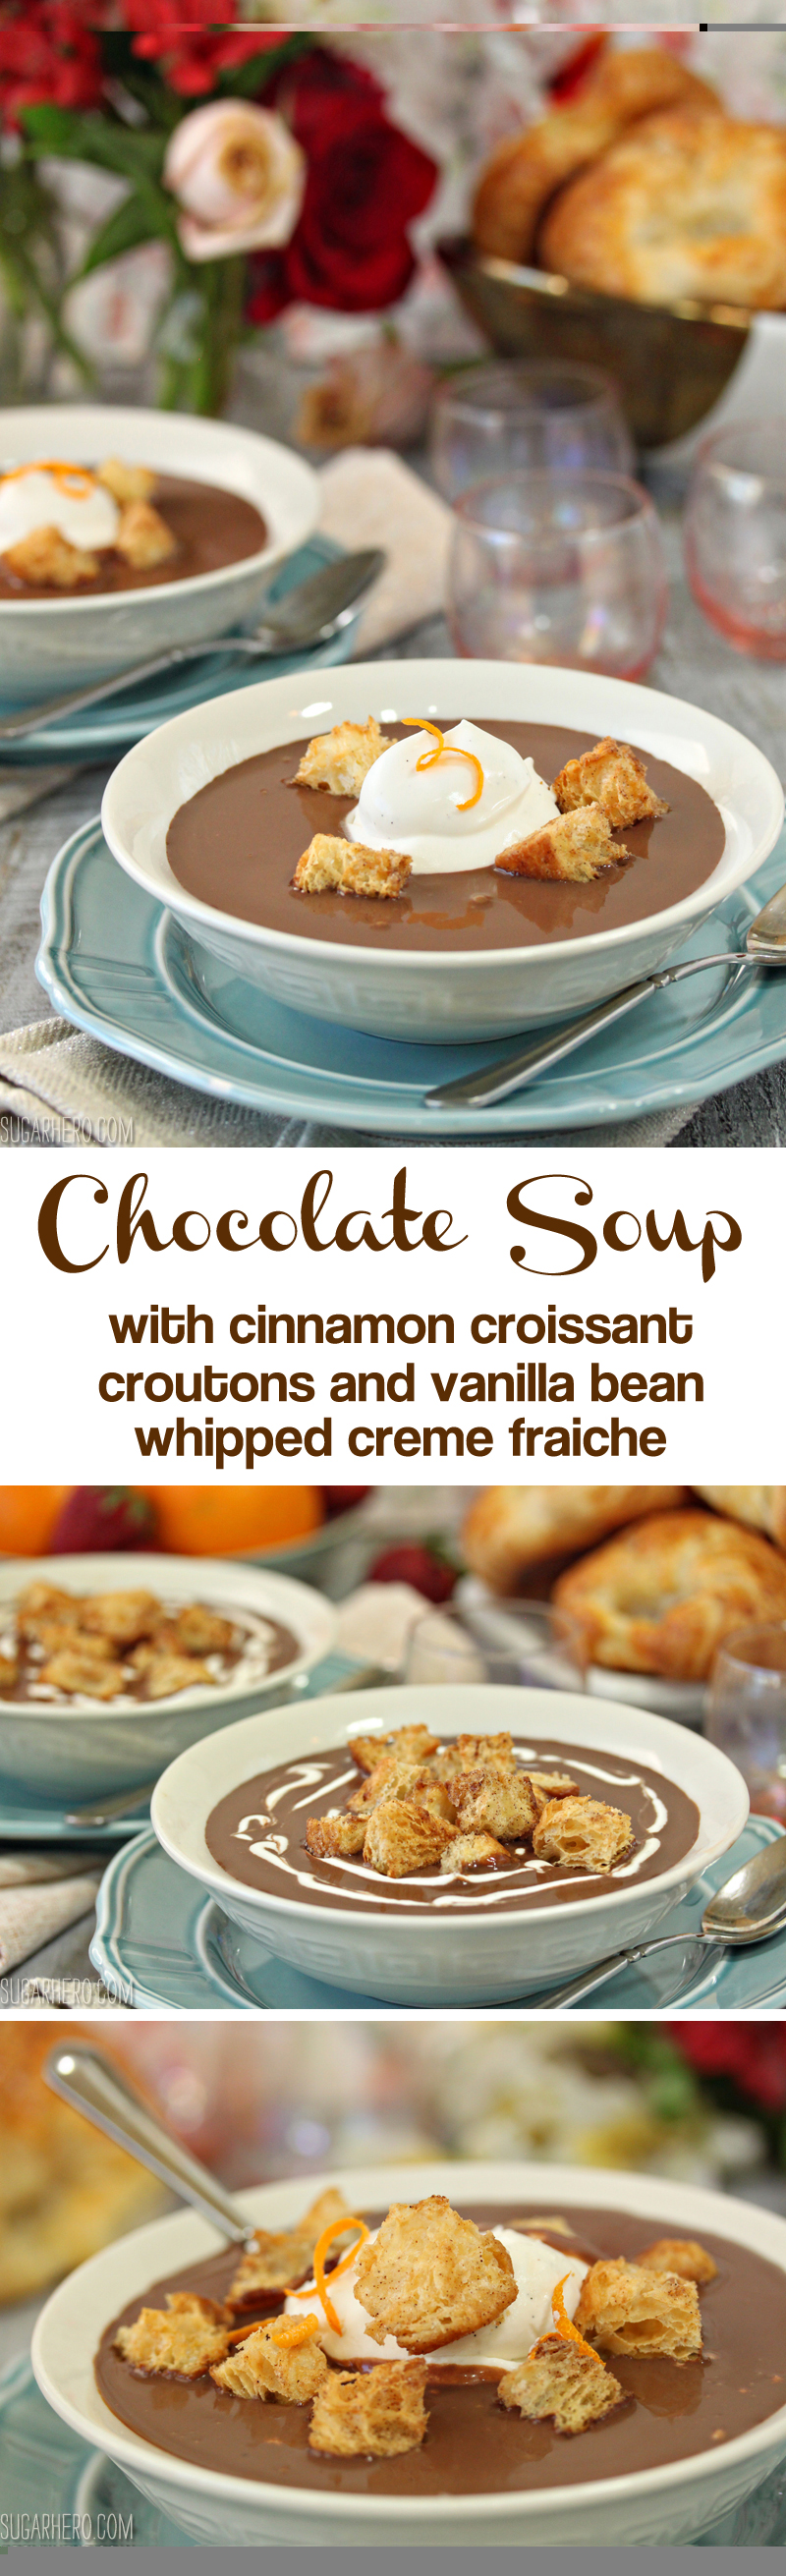 Chocolate Soup with Cinnamon Croissant Croutons and Whipped Vanilla Bean Creme Fraiche | From SugarHero.com